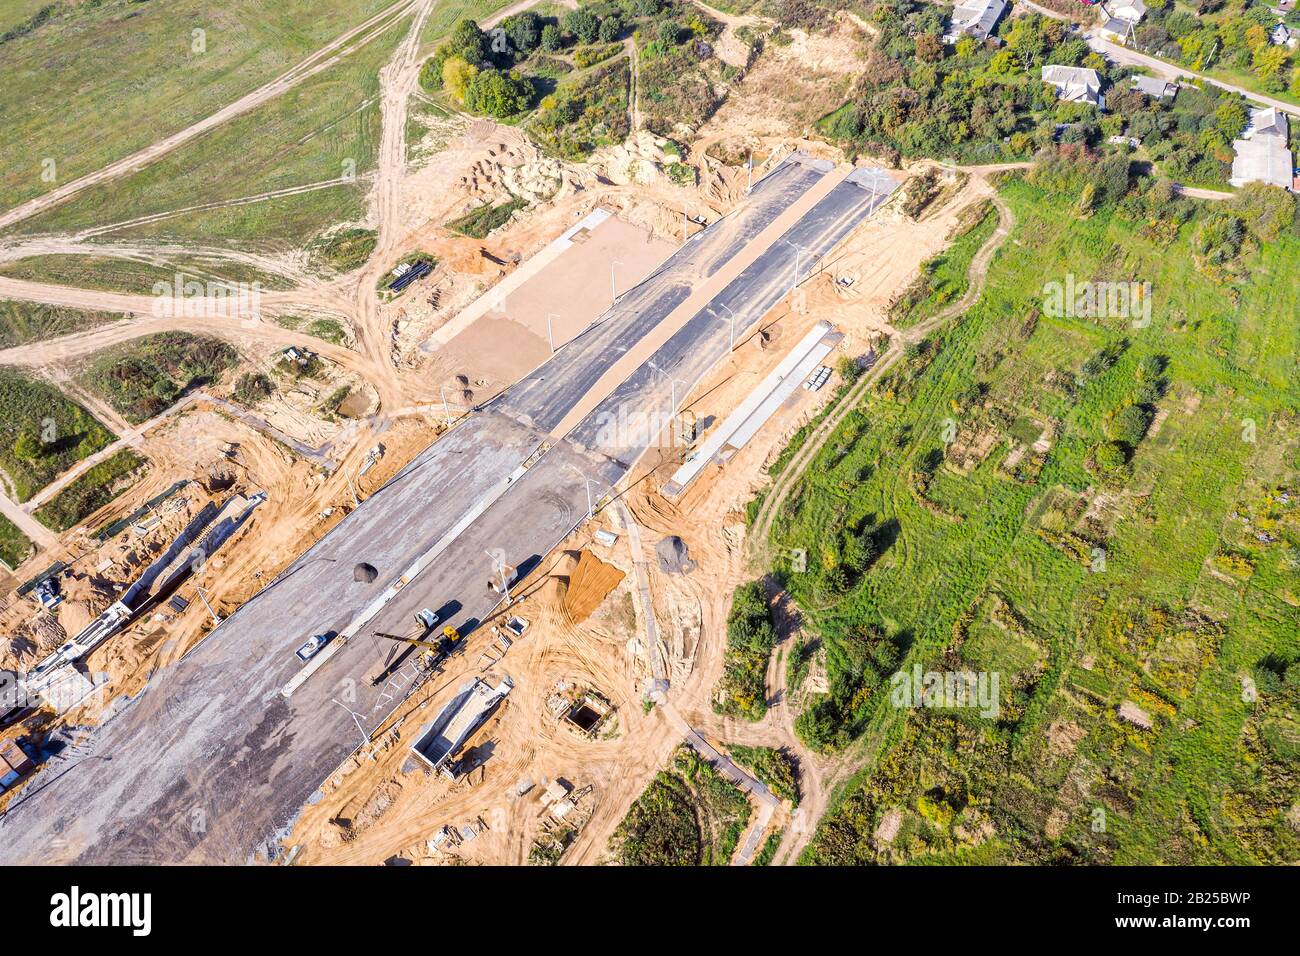 building of new city road in suburb area. heavy industrial machines working at construction site. aerial view Stock Photo